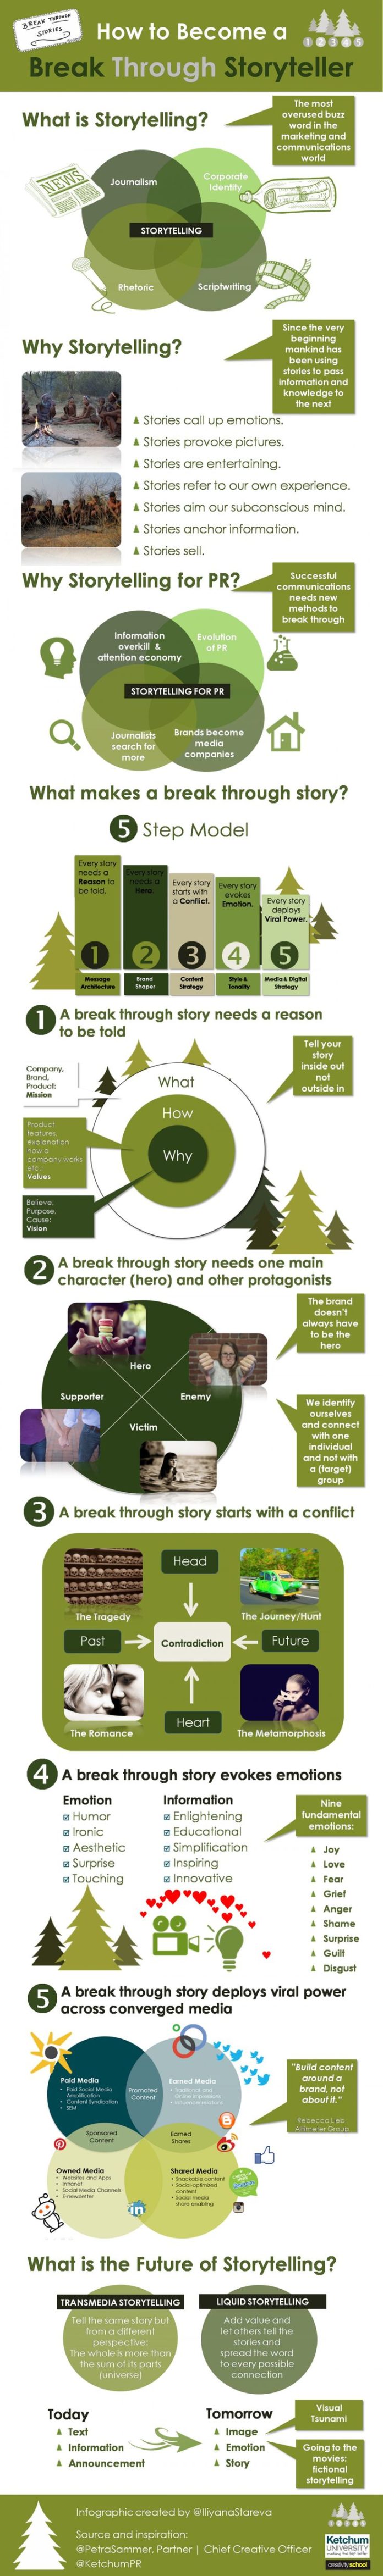 Business infographic : How to Become a Break Through Storyteller: 5 ...